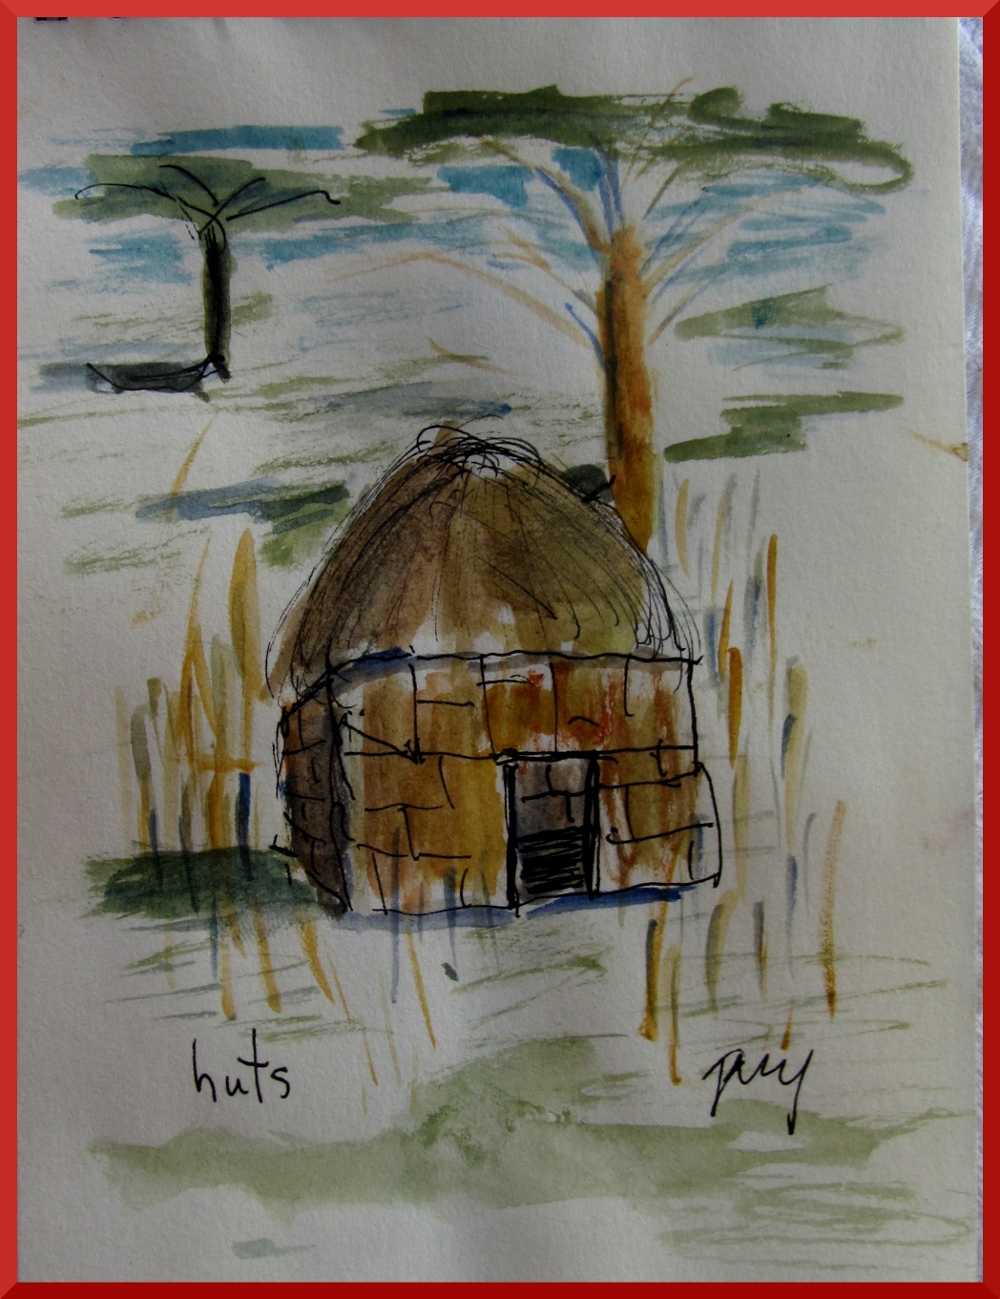 Huts in Tanzania (from the journal I kept)